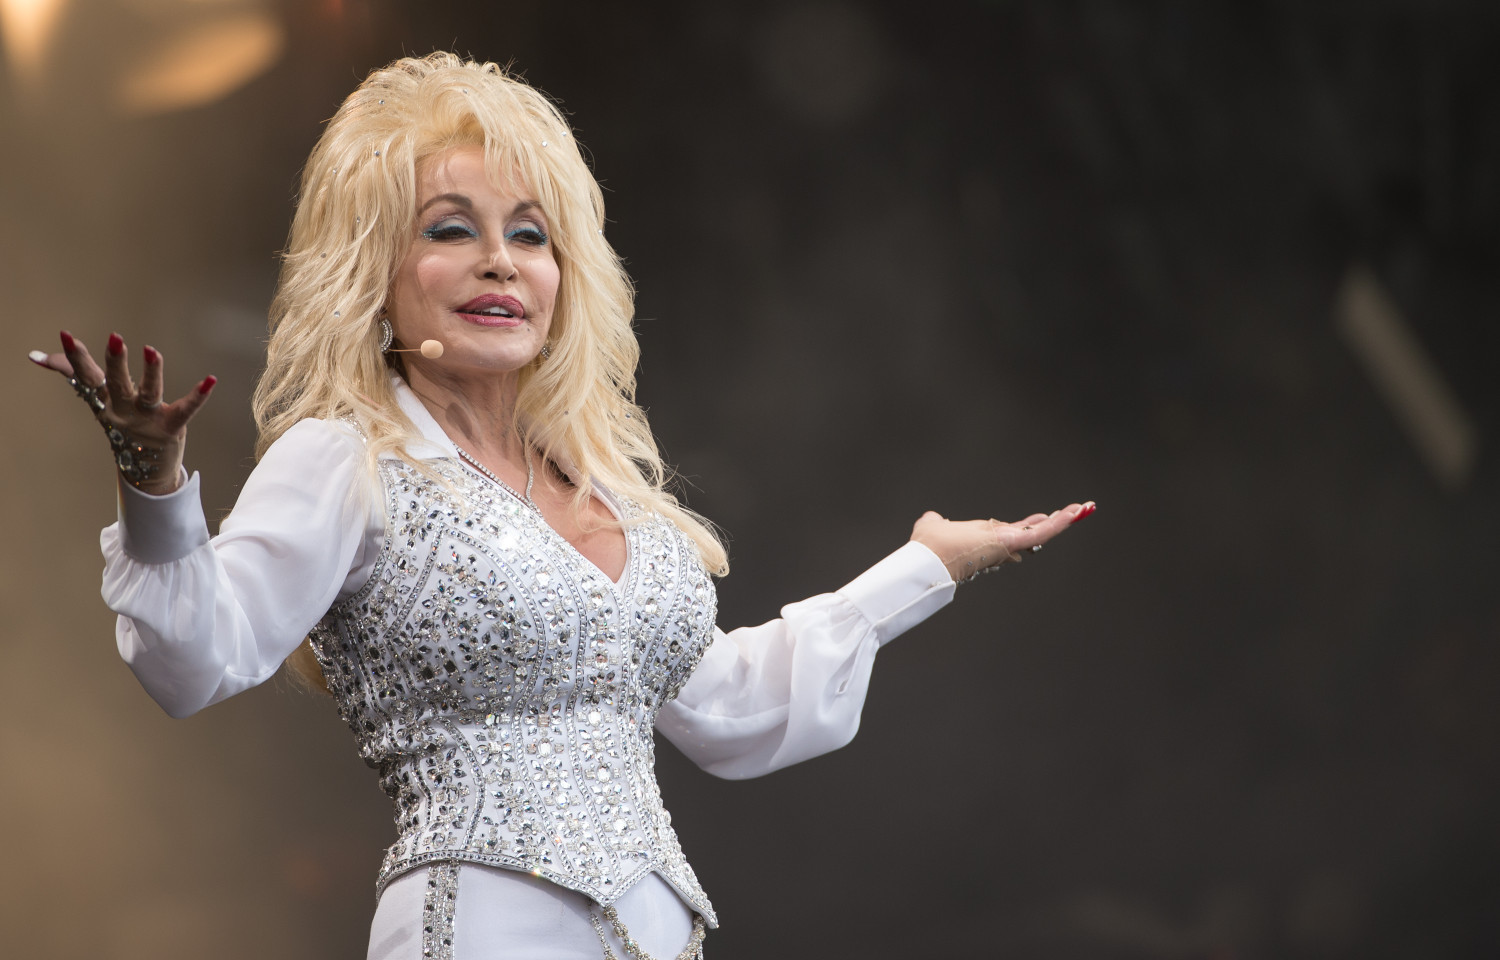 Dolly Parton Analsex Com - Dolly Parton tells Christians to stop judging gay people